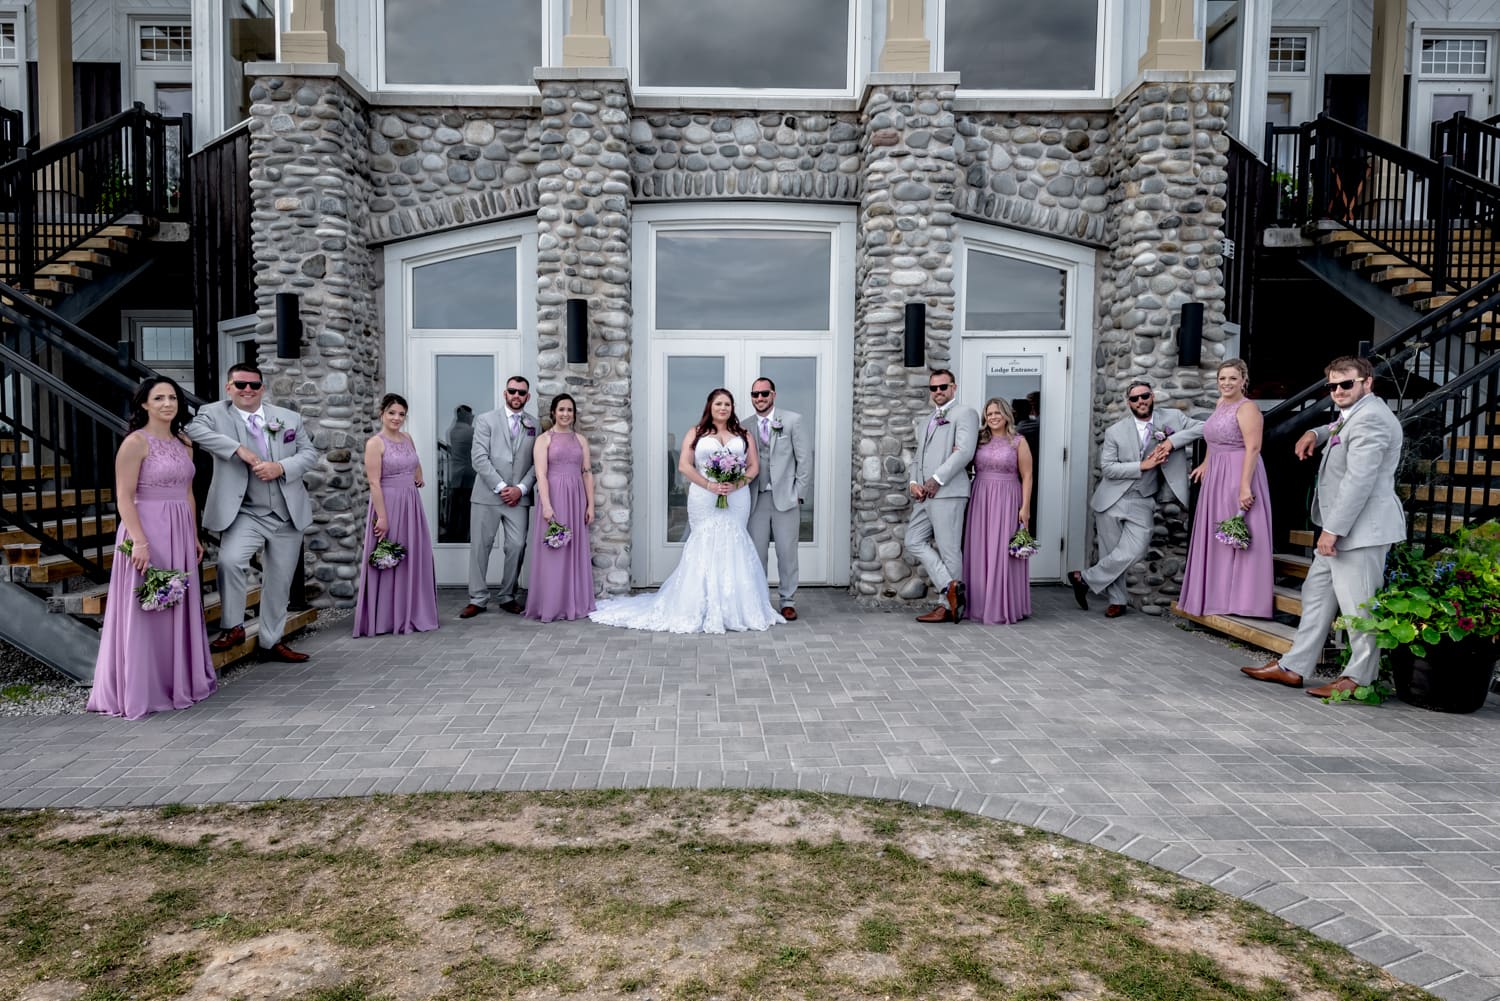 The bride and groom wedding party photos against the White Point main stone building in Nova Scotia.